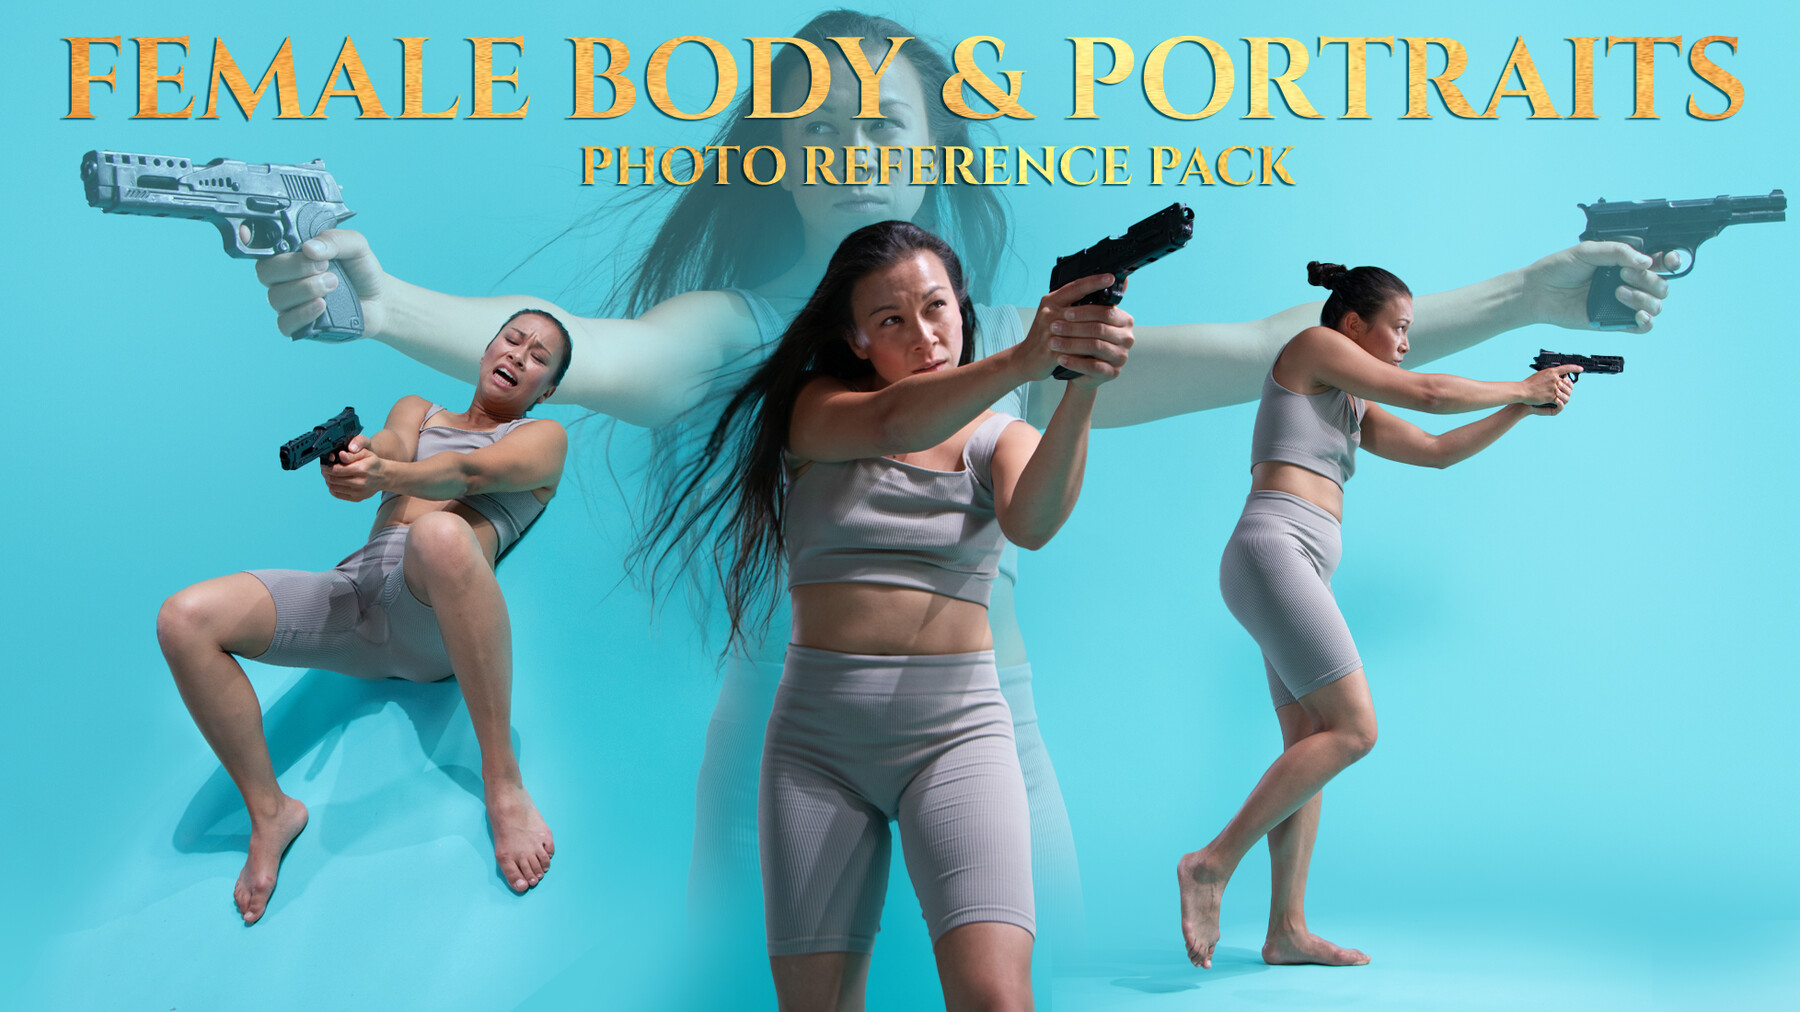 Female Body & Portraits vol. 2 Photo Reference Pack for Artists 739 JPEGs